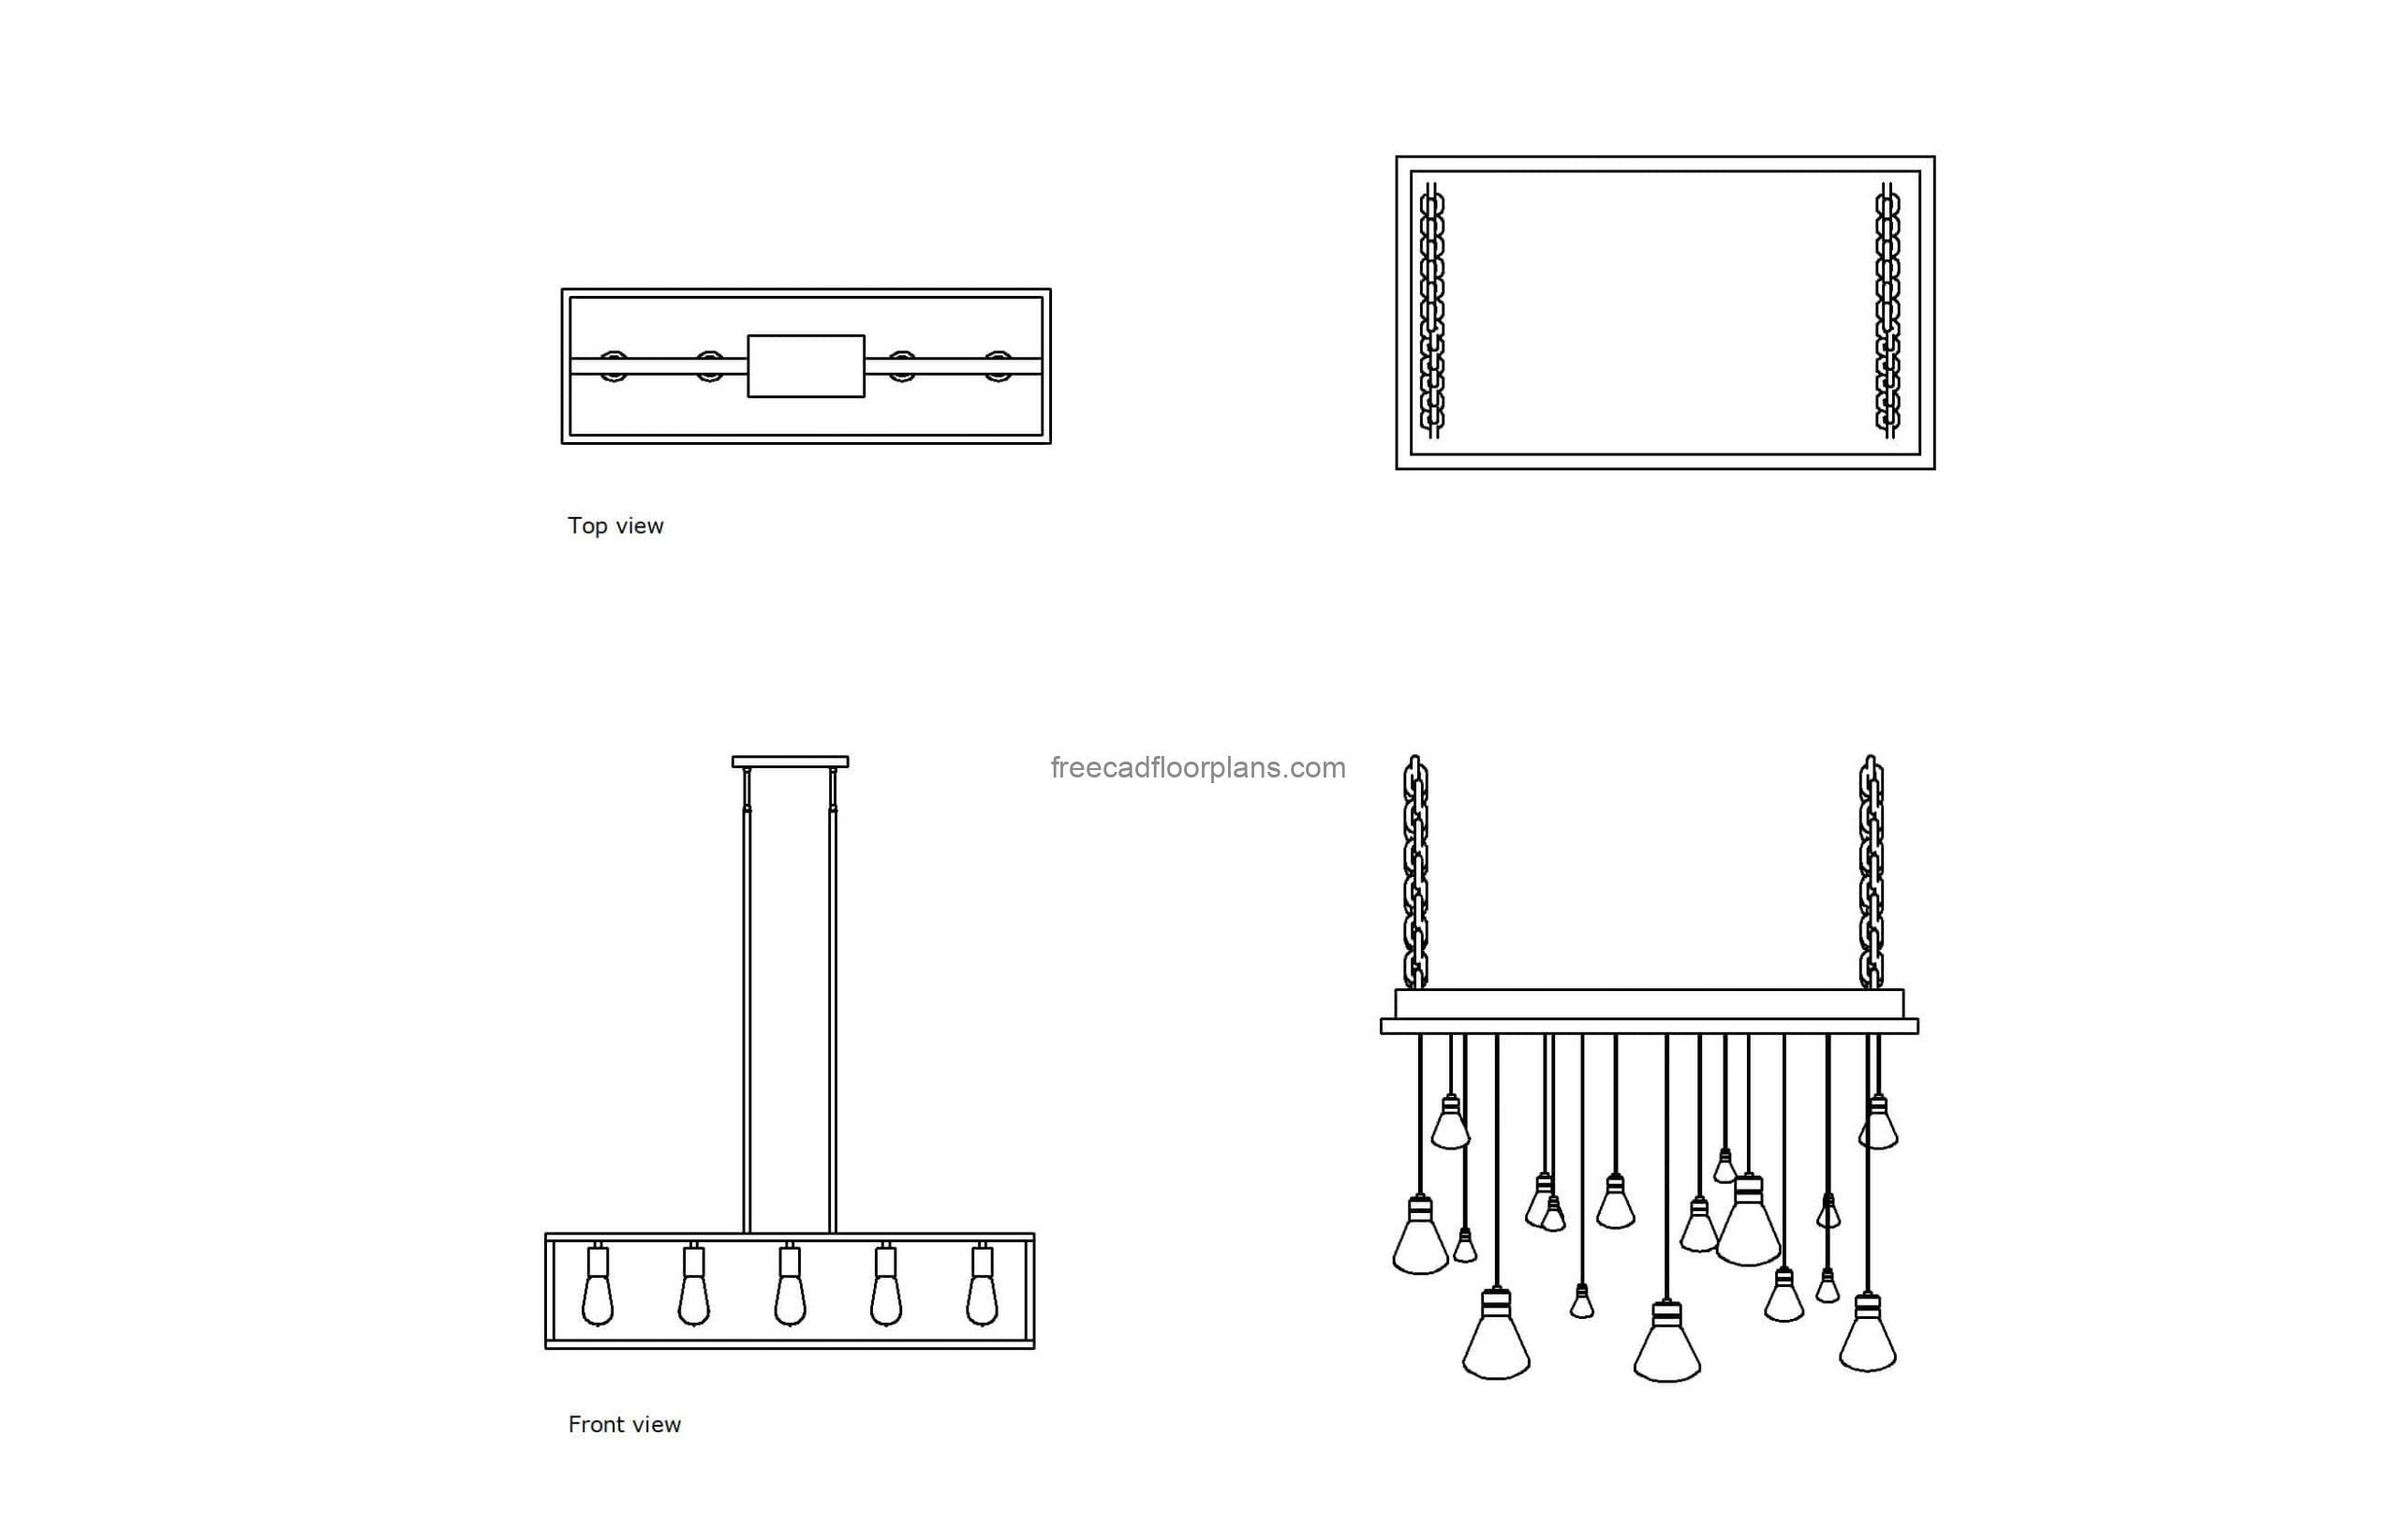 autocad drawing of different industrial chandeliers, plan and elevation 2d views, dwg file for free download